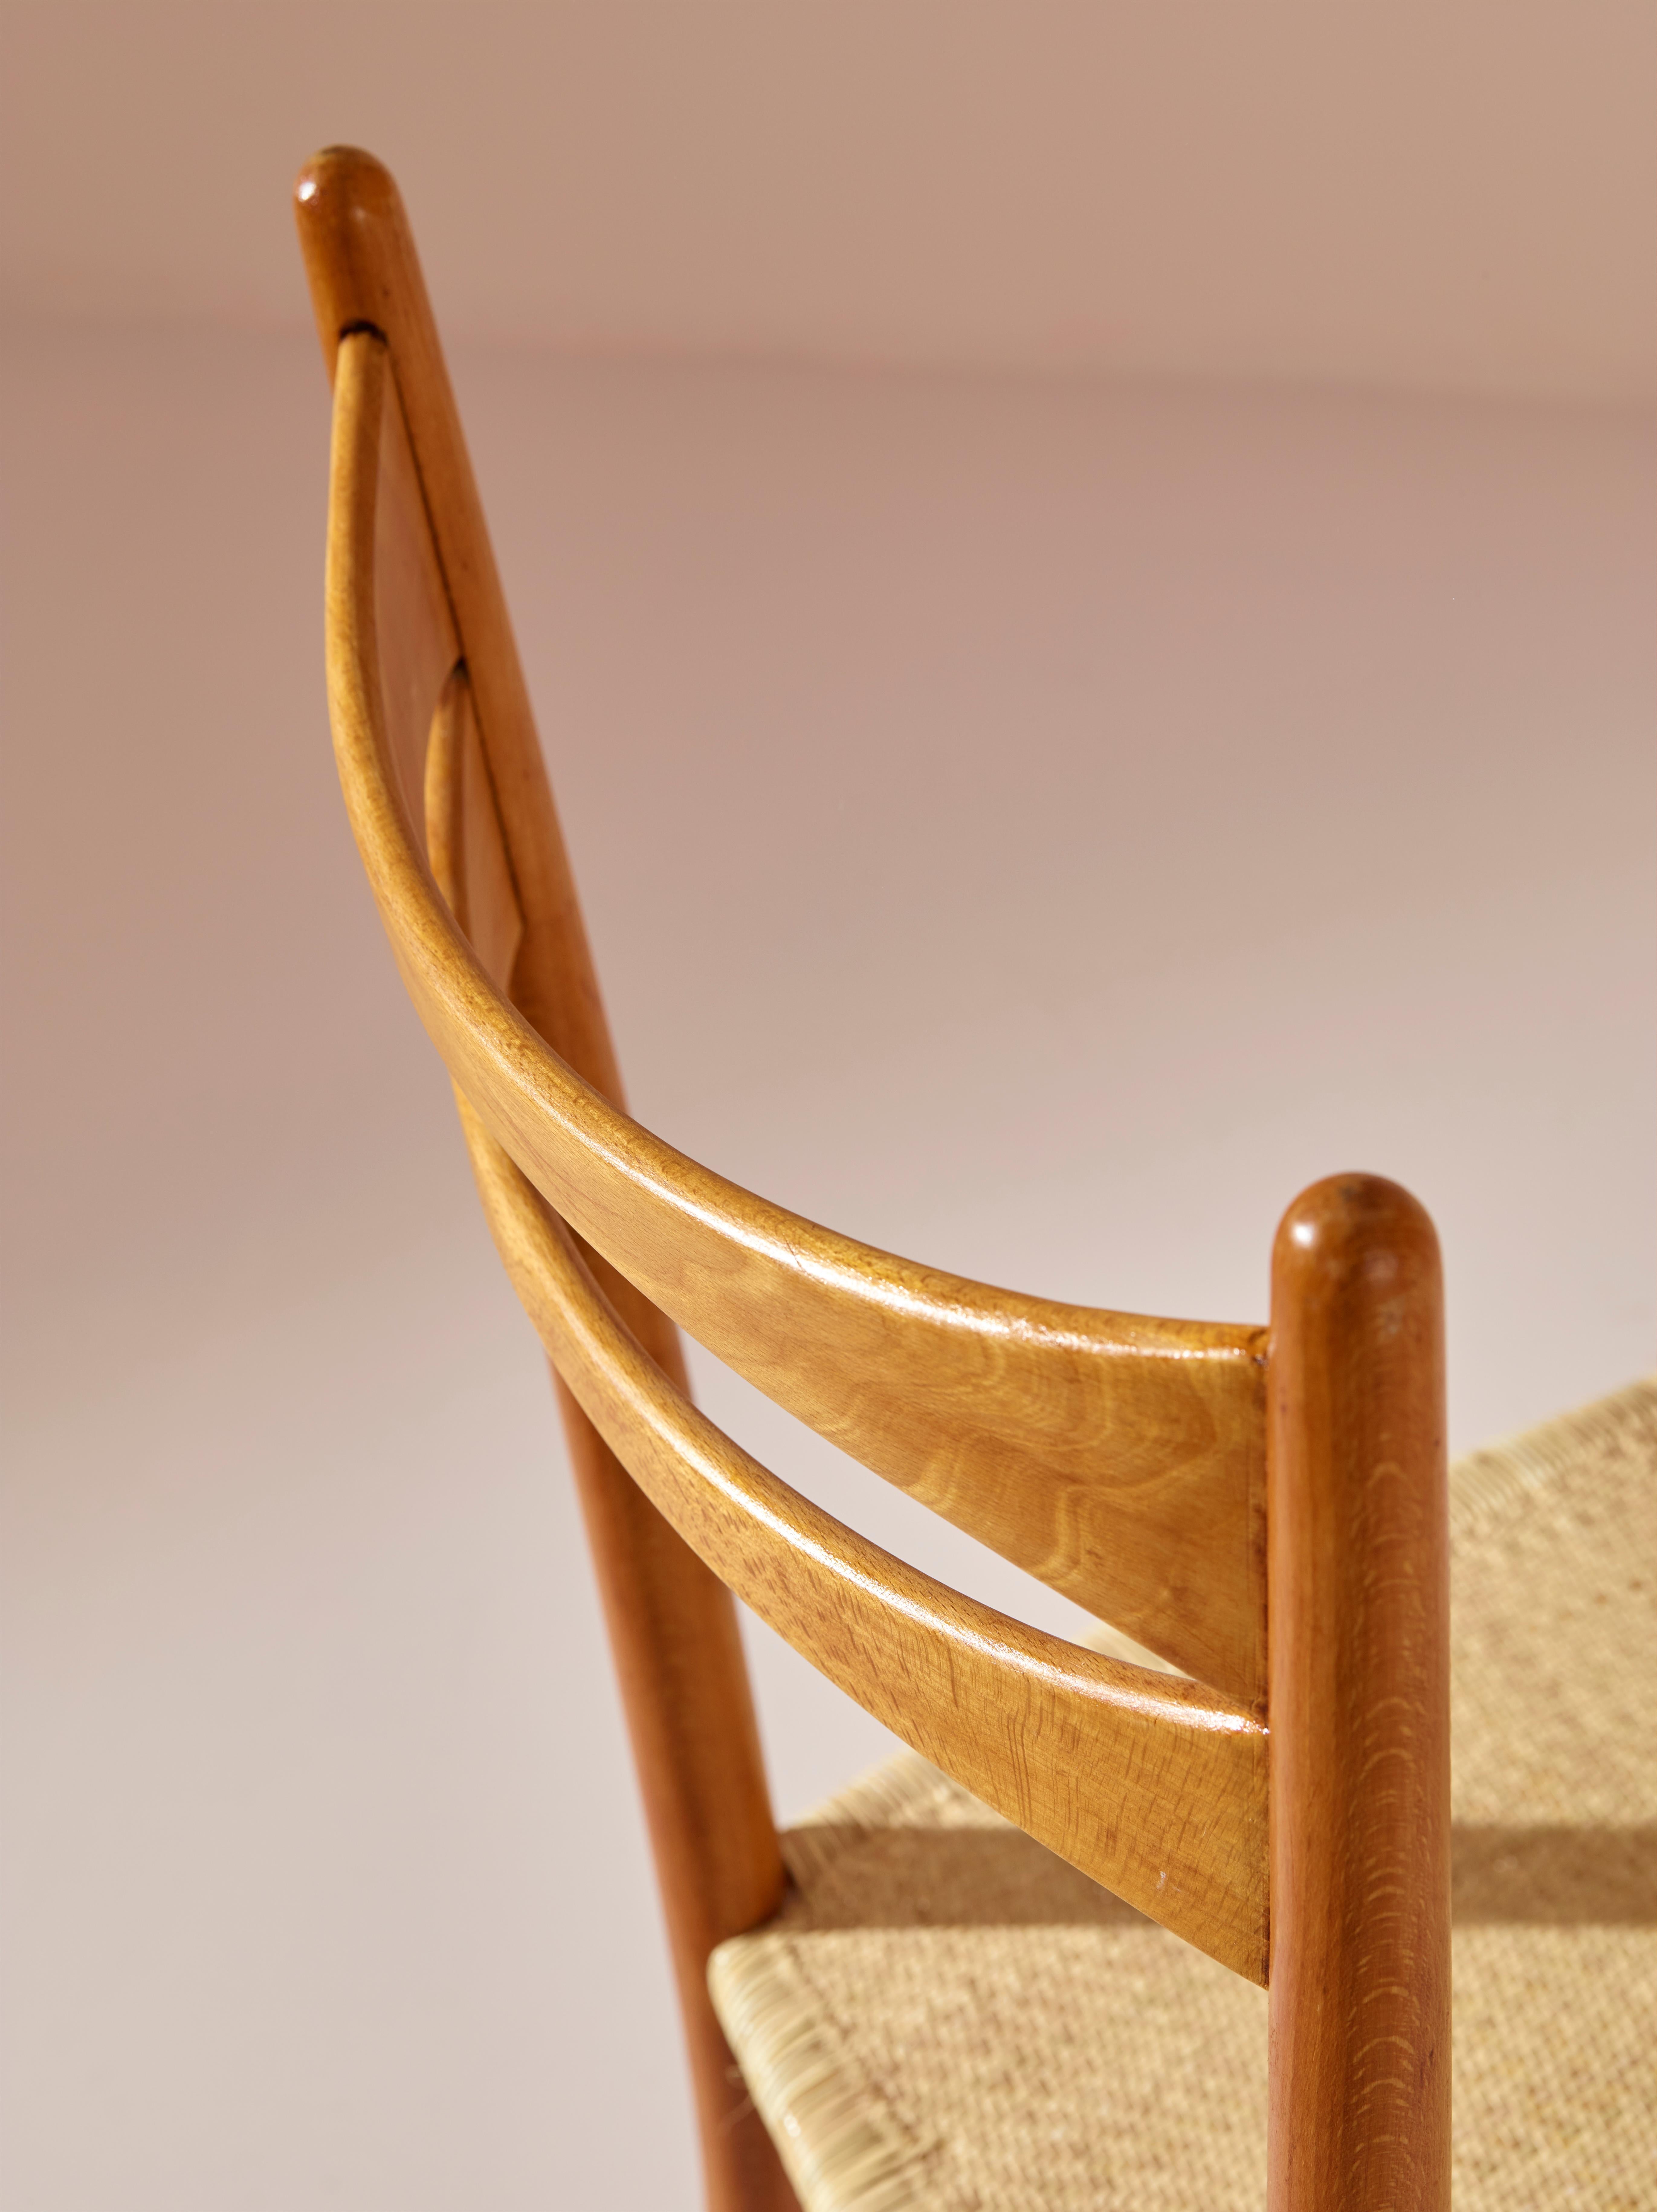 Straw Emanuele Rambaldi set of six beech and straw chairs by Chiappe, Chiavari, 1940s For Sale